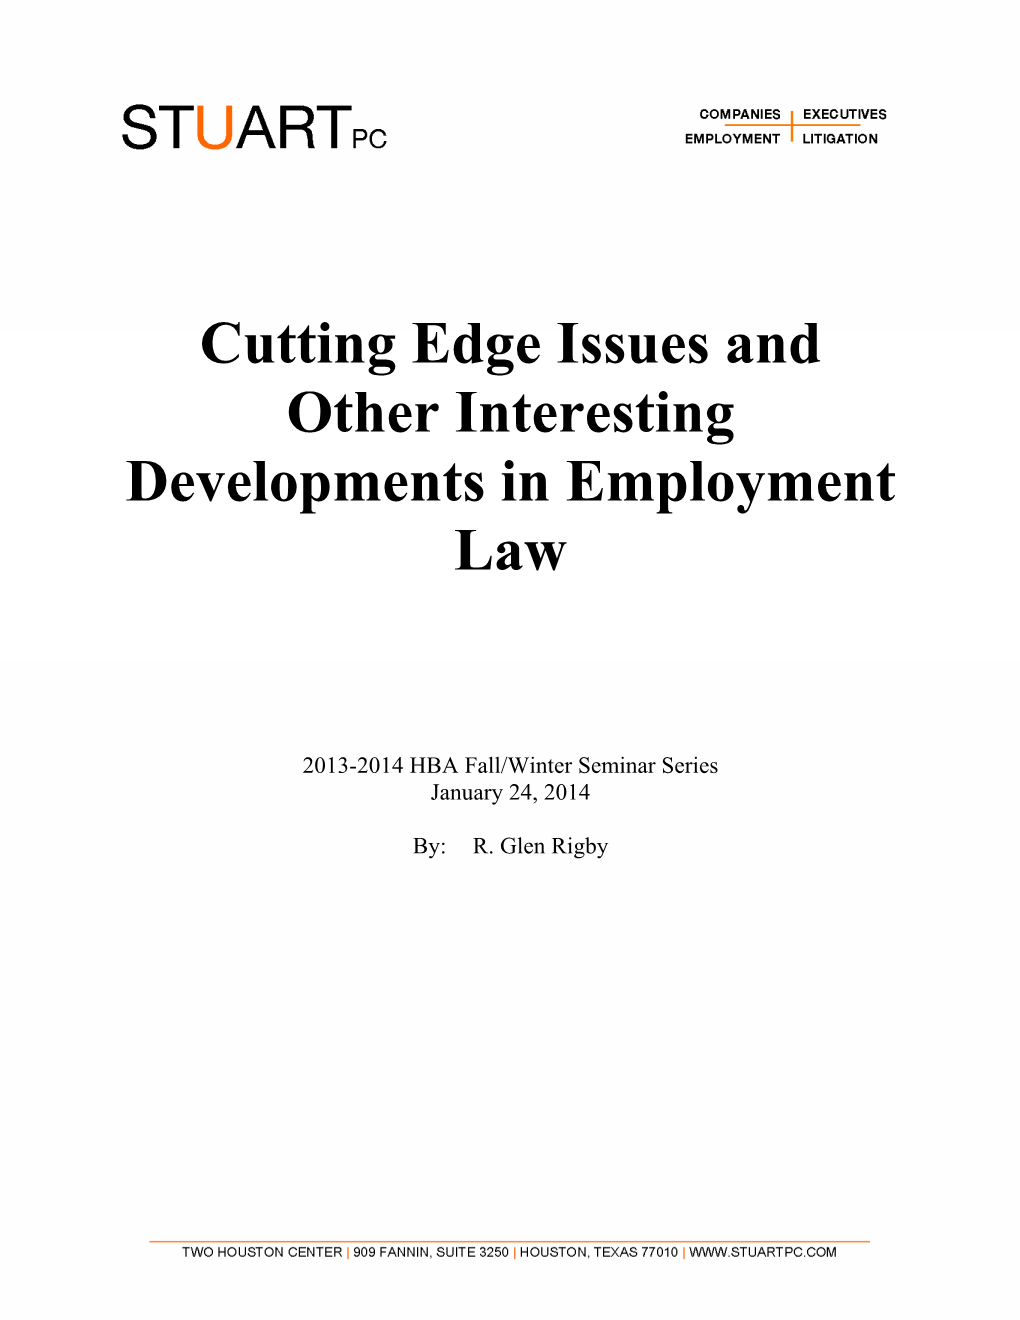 Cutting Edge Issues and Other Interesting Developments in Employment Law